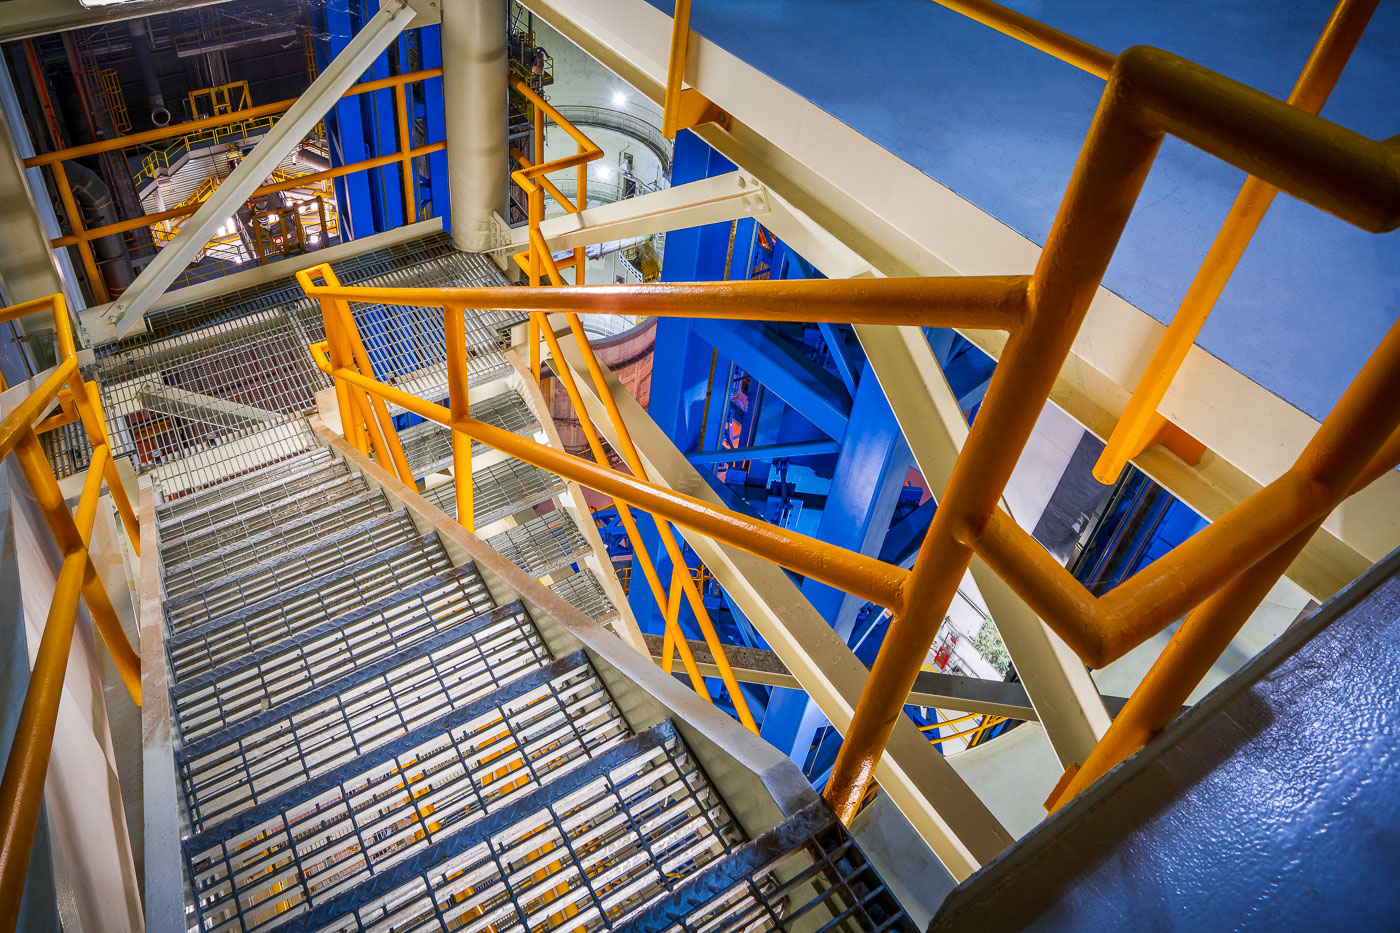 Stairway inside the vertical assembly center at NASA Michoud Assembly Facility where the Artemis spacecraft is being built.